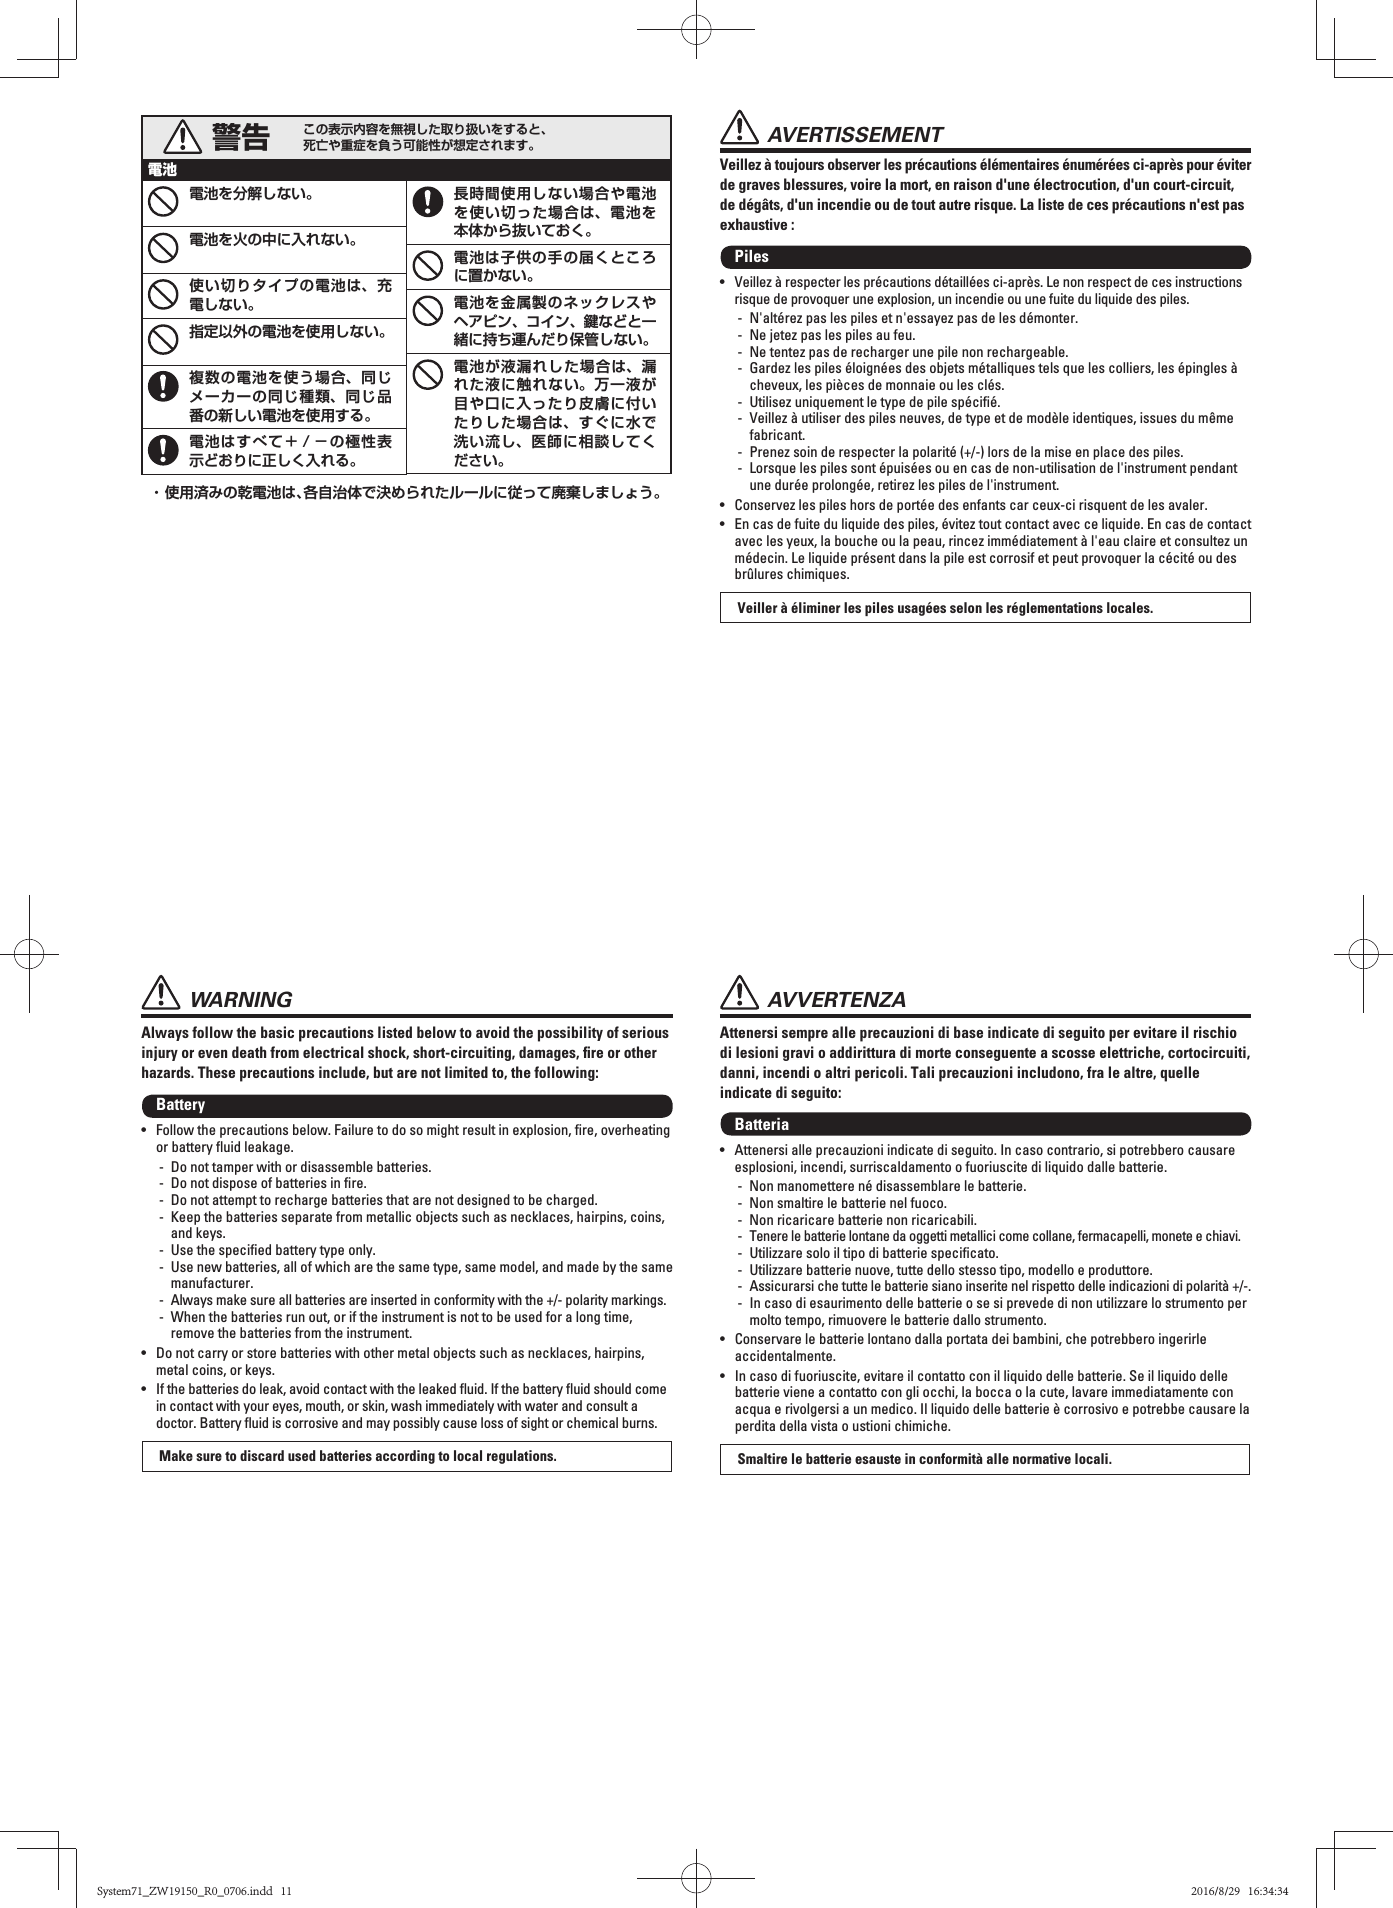 Page 2 of 5 - Yamaha  Electric SYSTEM71 Manual EN